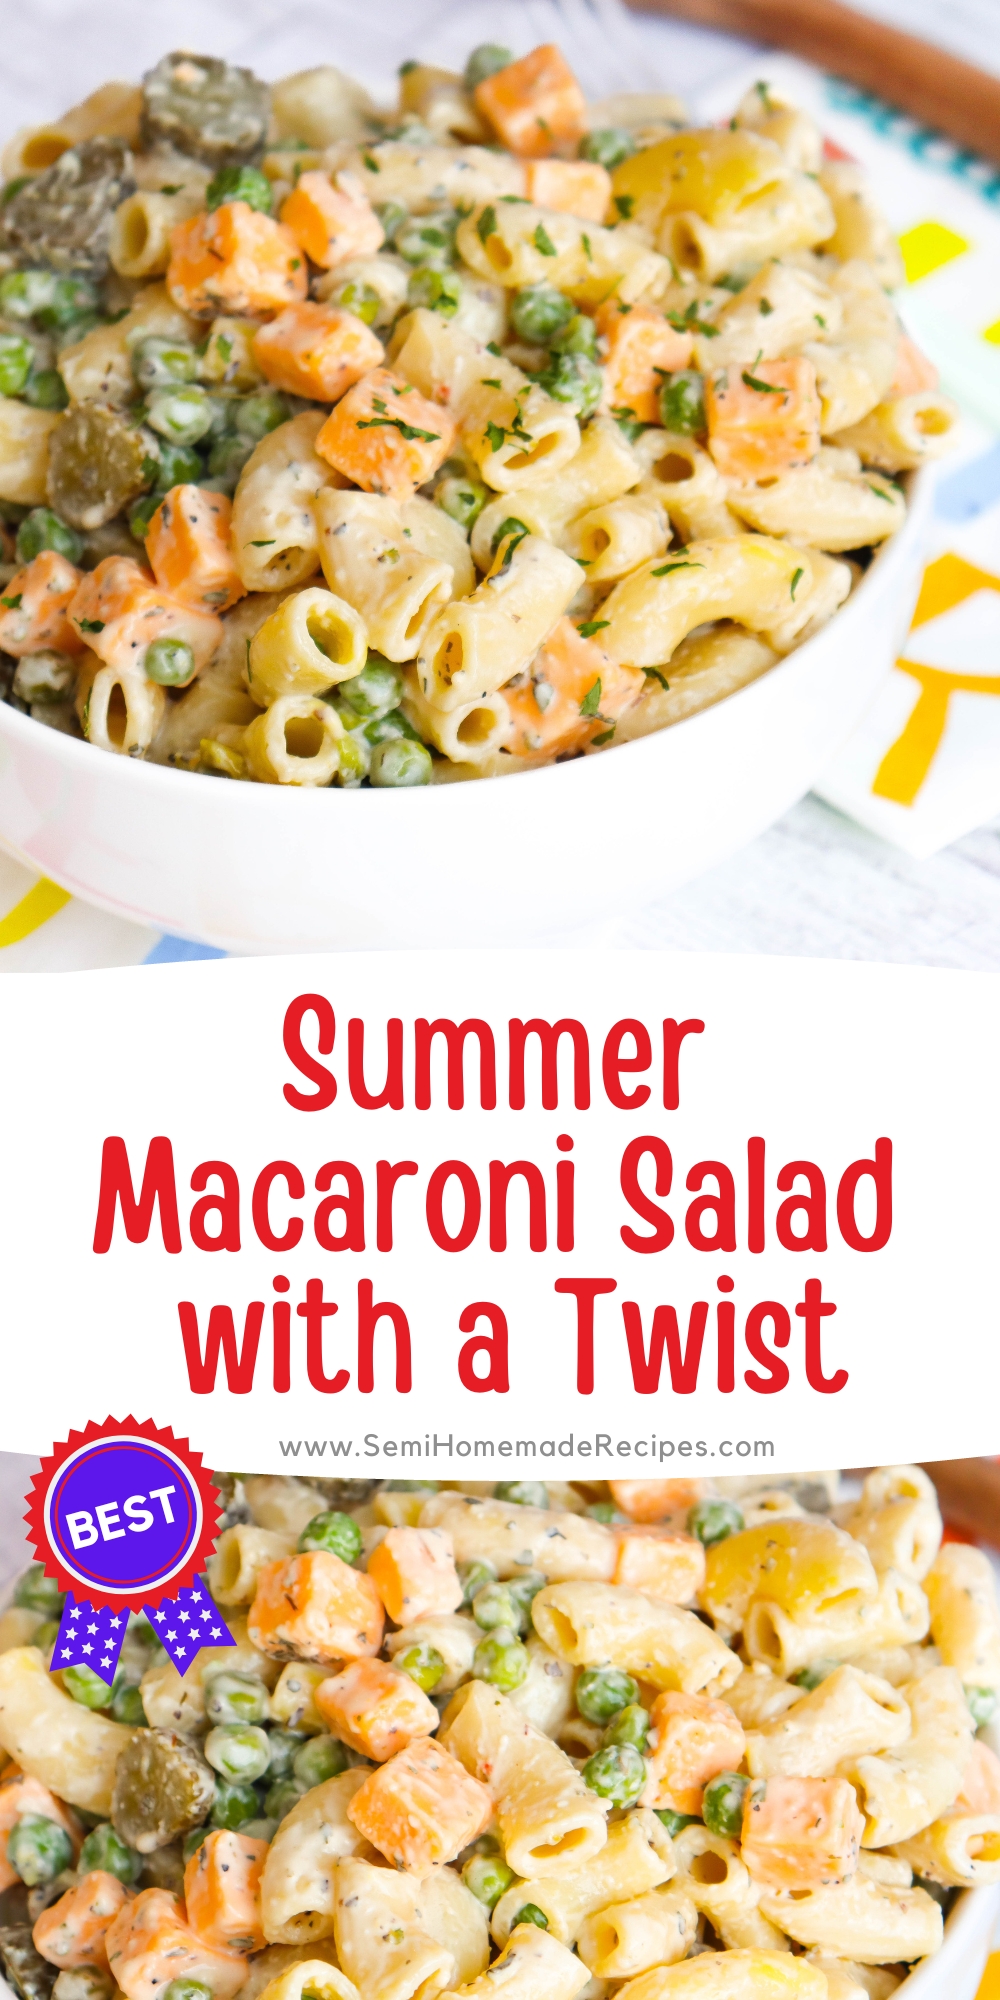 Have you ever tried adding pickles and Italian Dressing to your summer macaroni salad? If not, you're missing out on a game-changing ingredient that adds a pop of tangy flavor! You're going to love this Summer Macaroni Salad with a Twist!